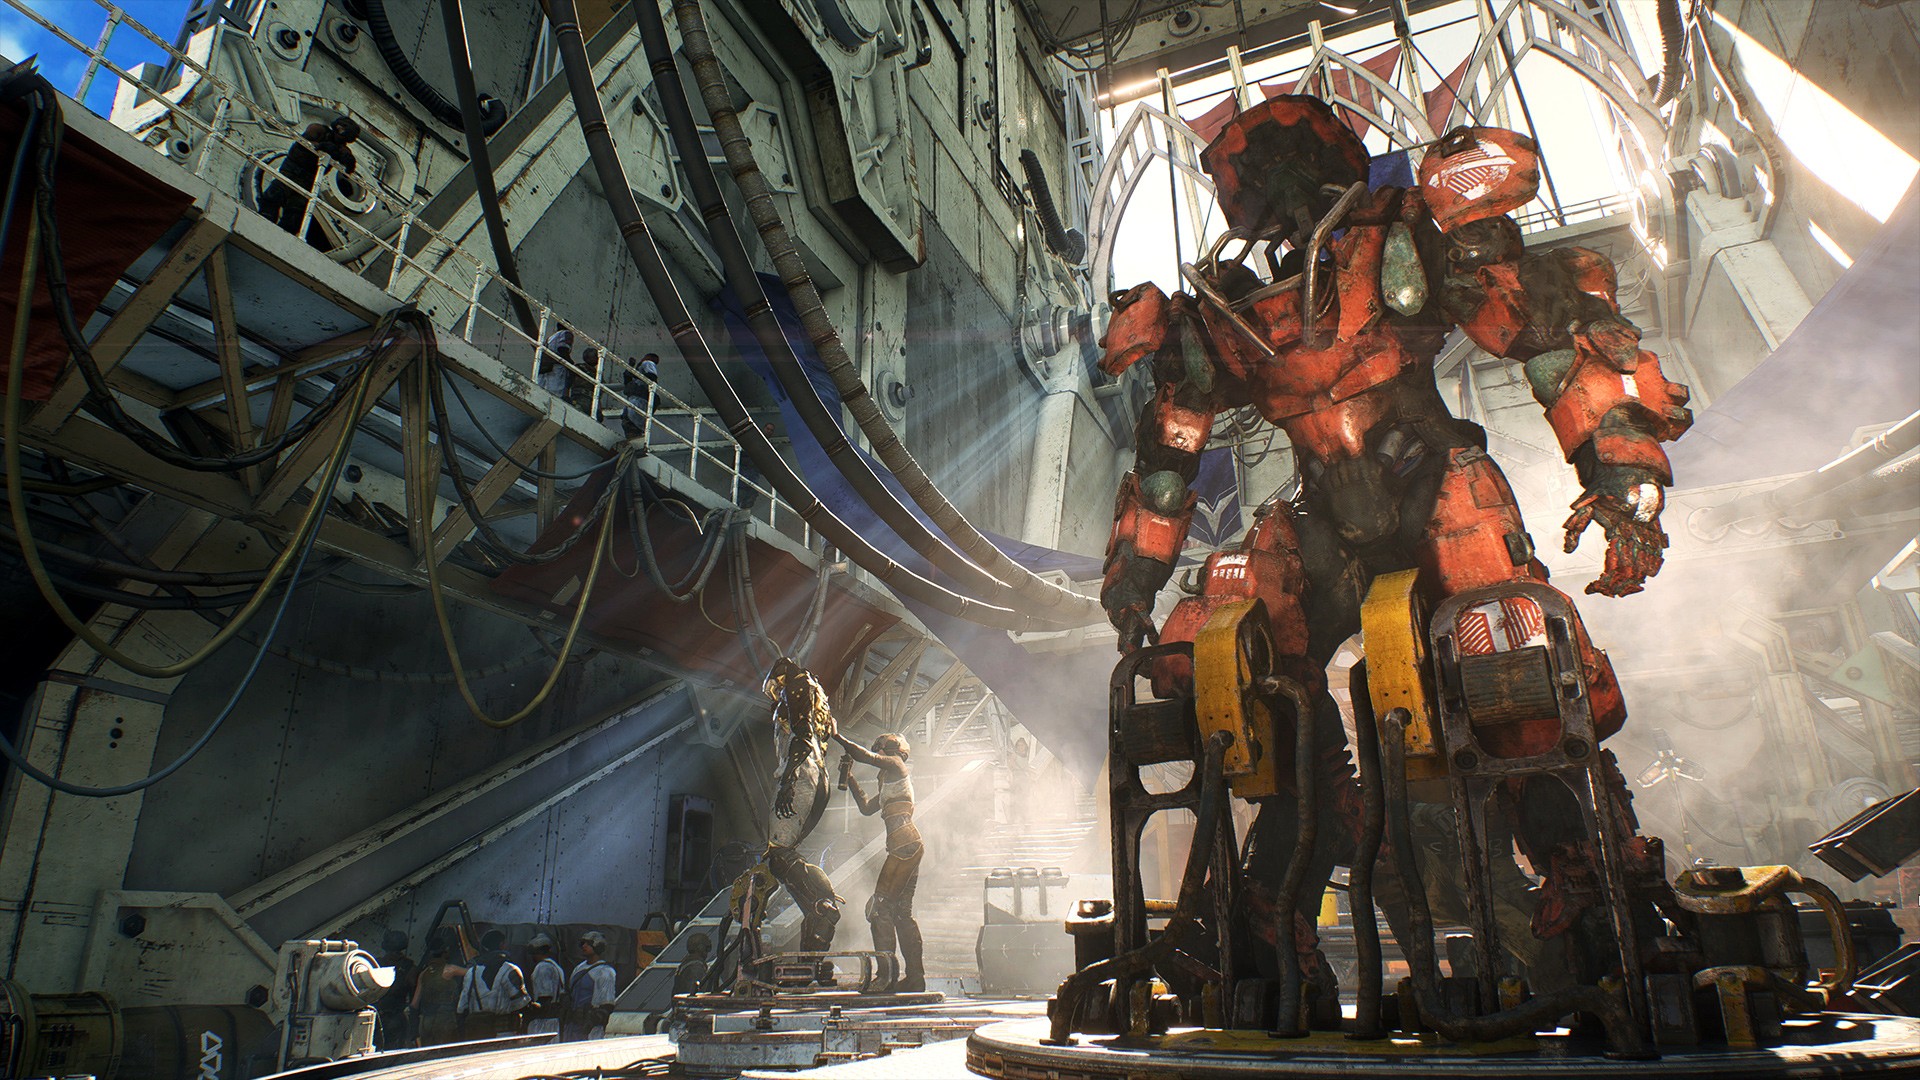 You can find Anthem's latest trailer here